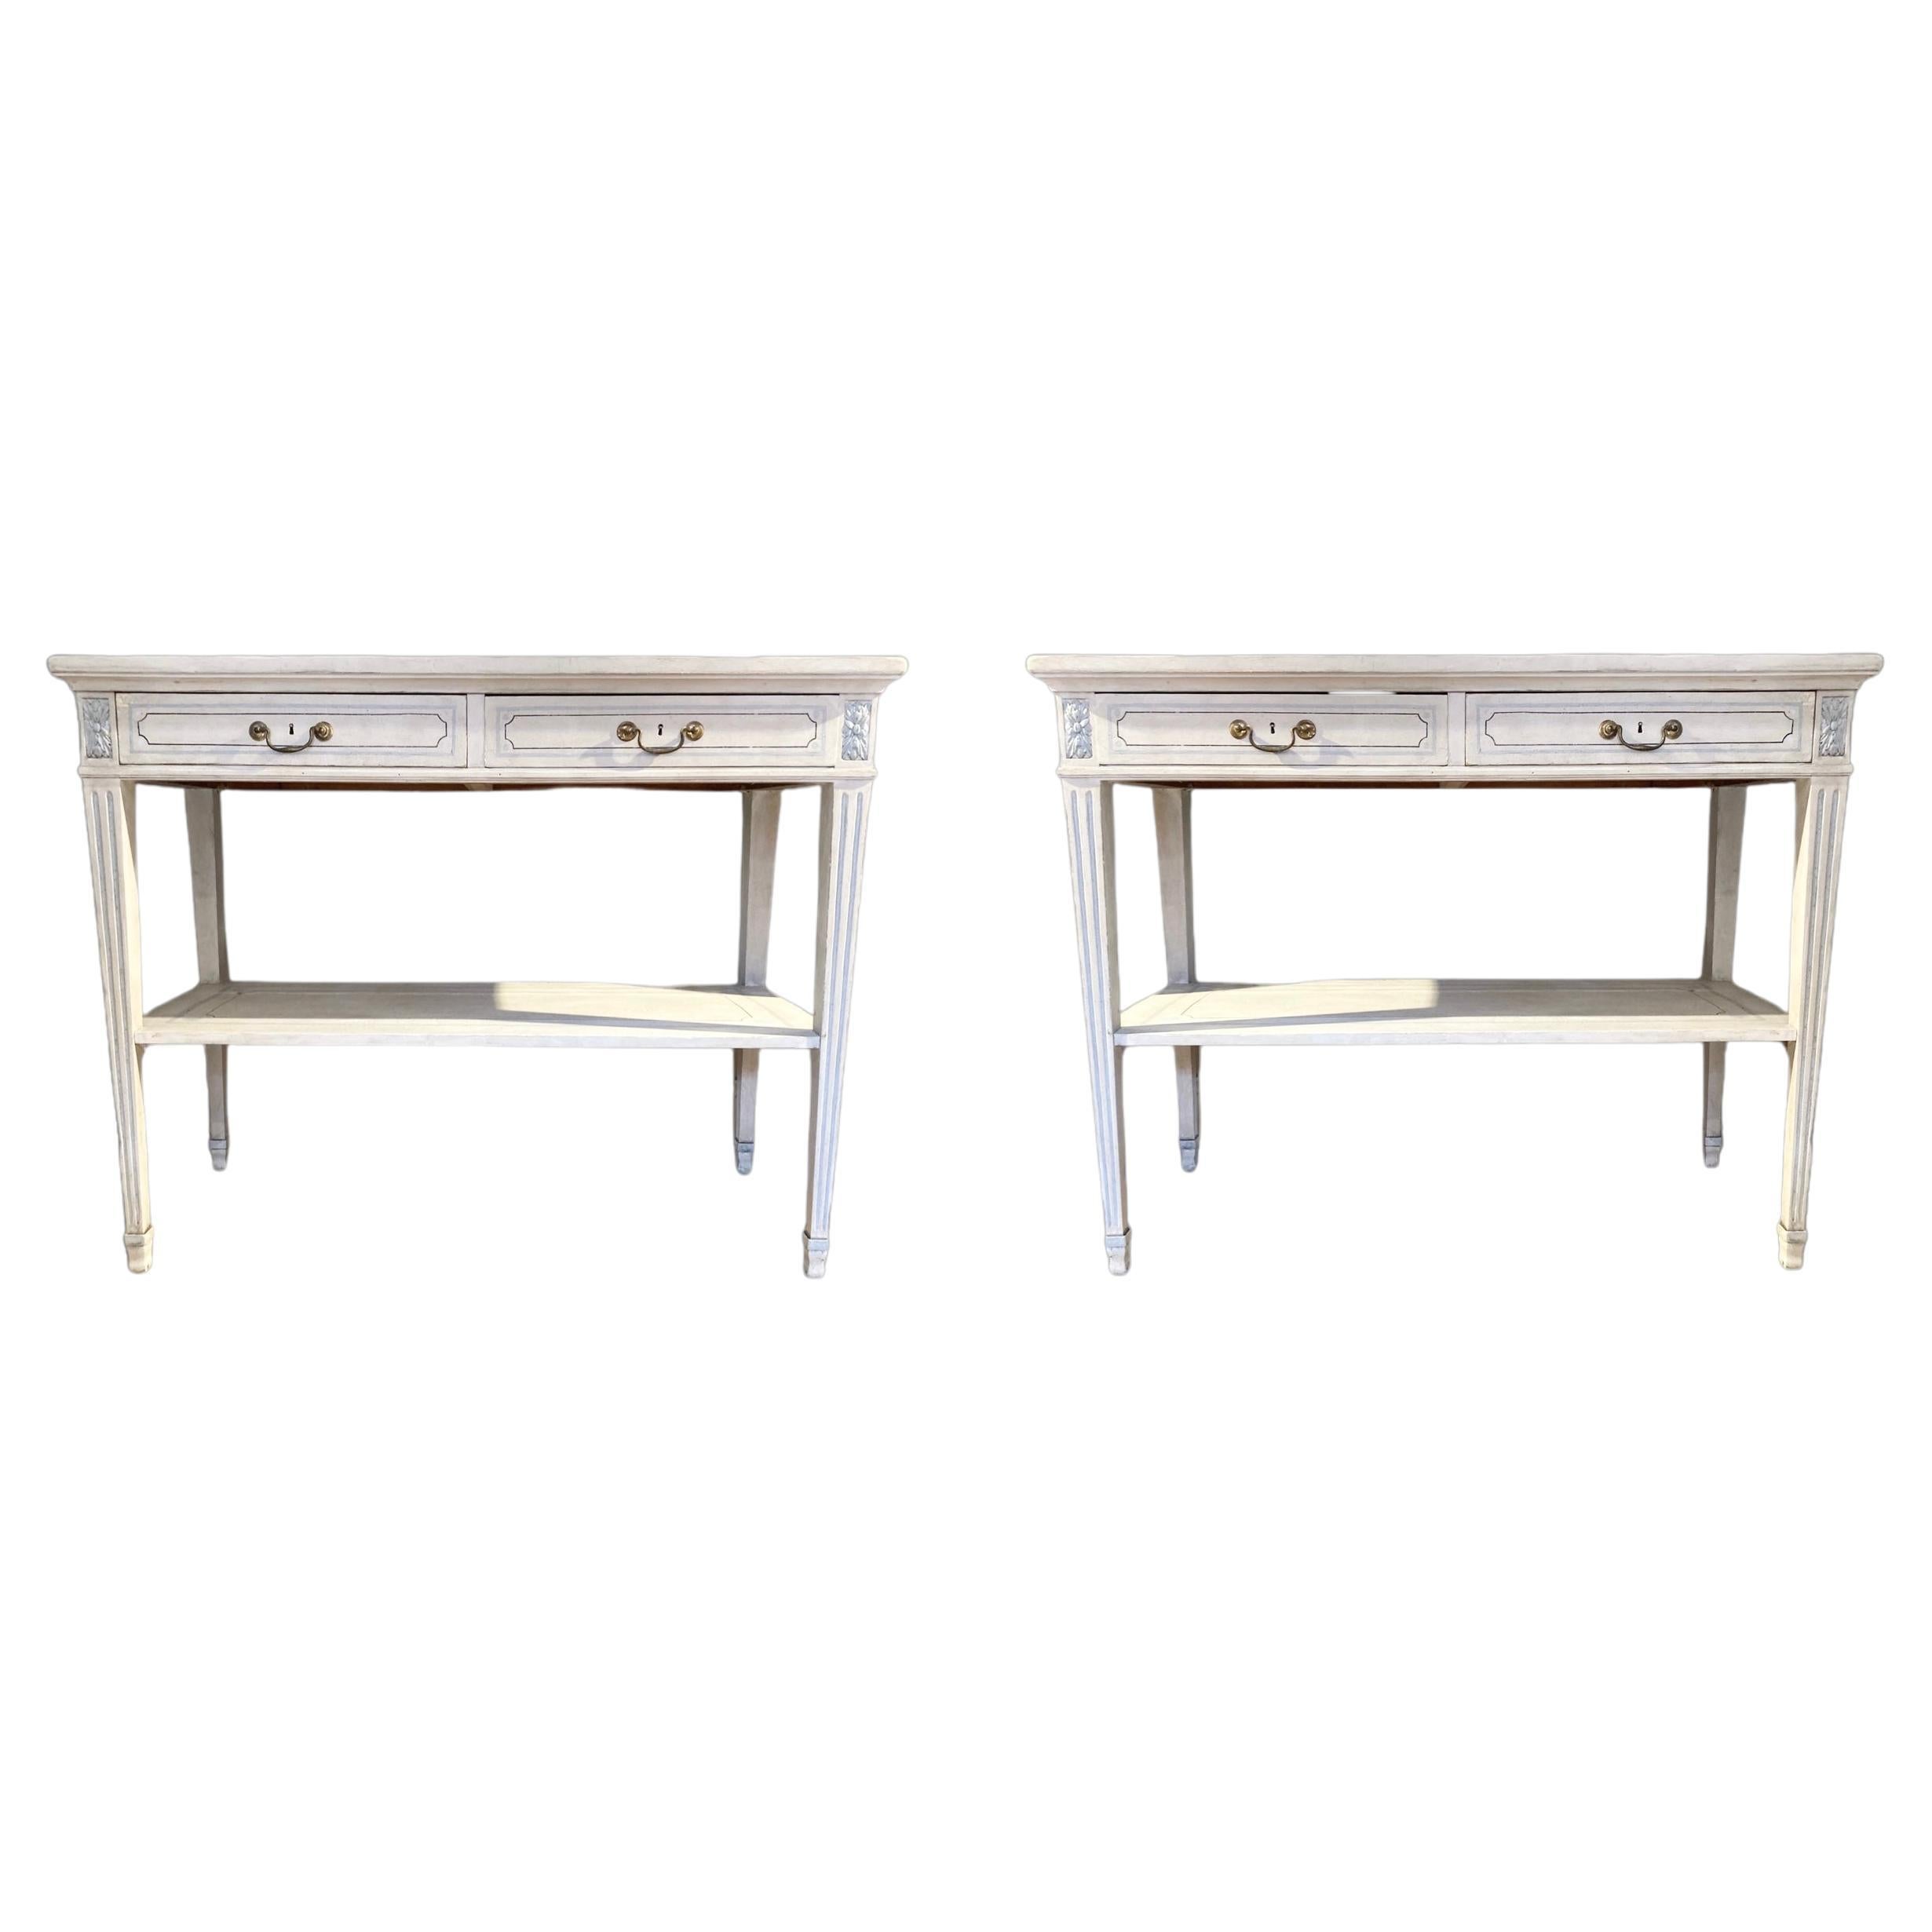 A fine pair of white painted 19th century side tables.